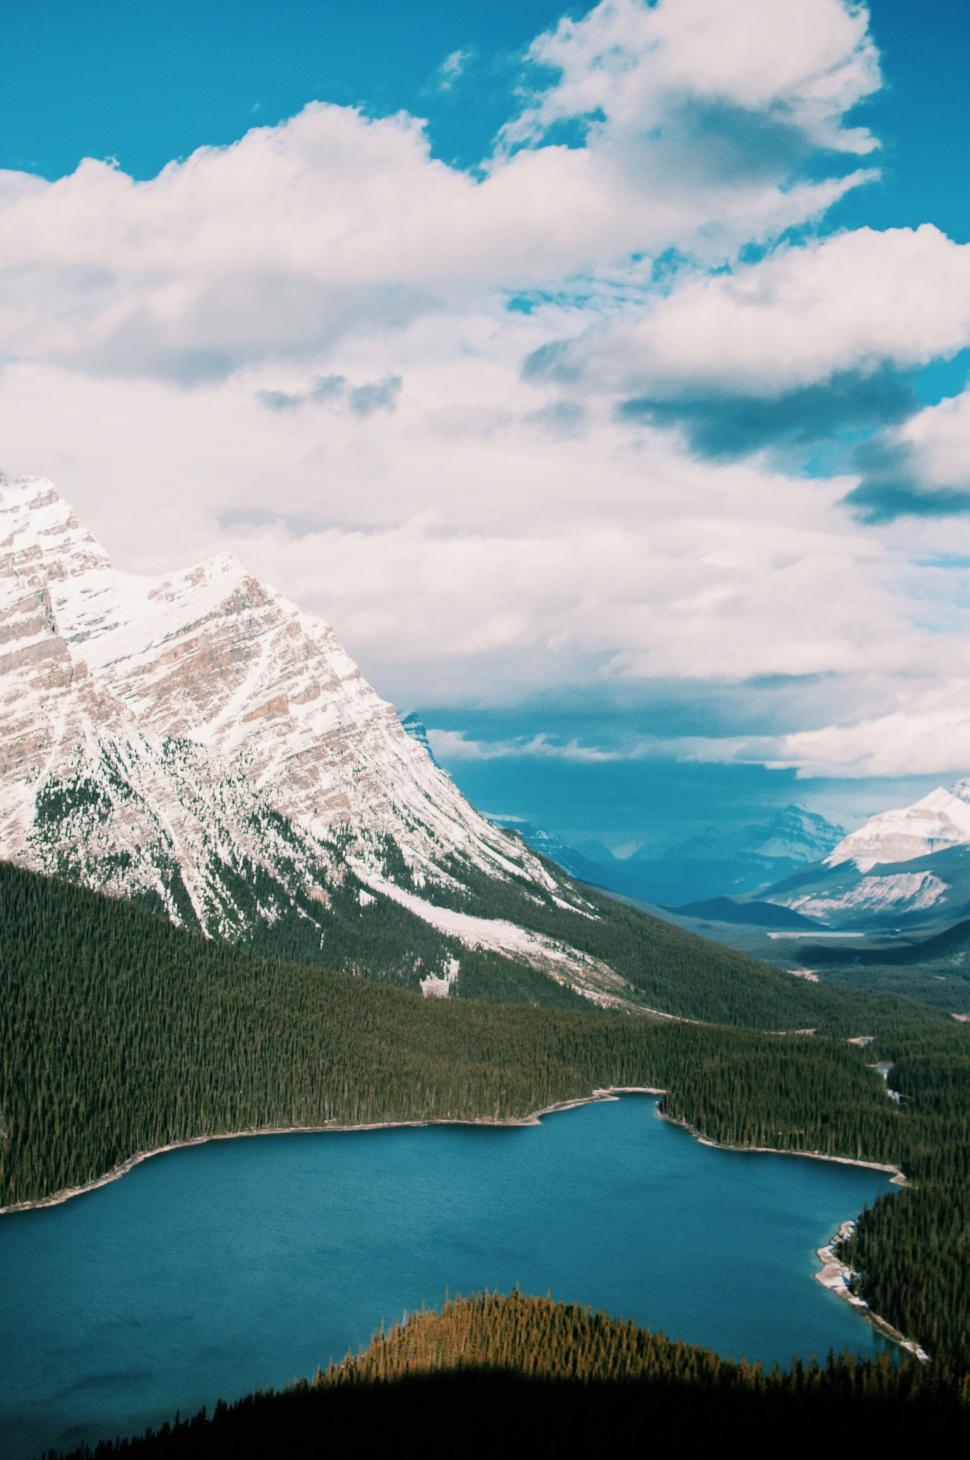 Free Image of Alpine Lake with a Mountain Backdrop in Canada 